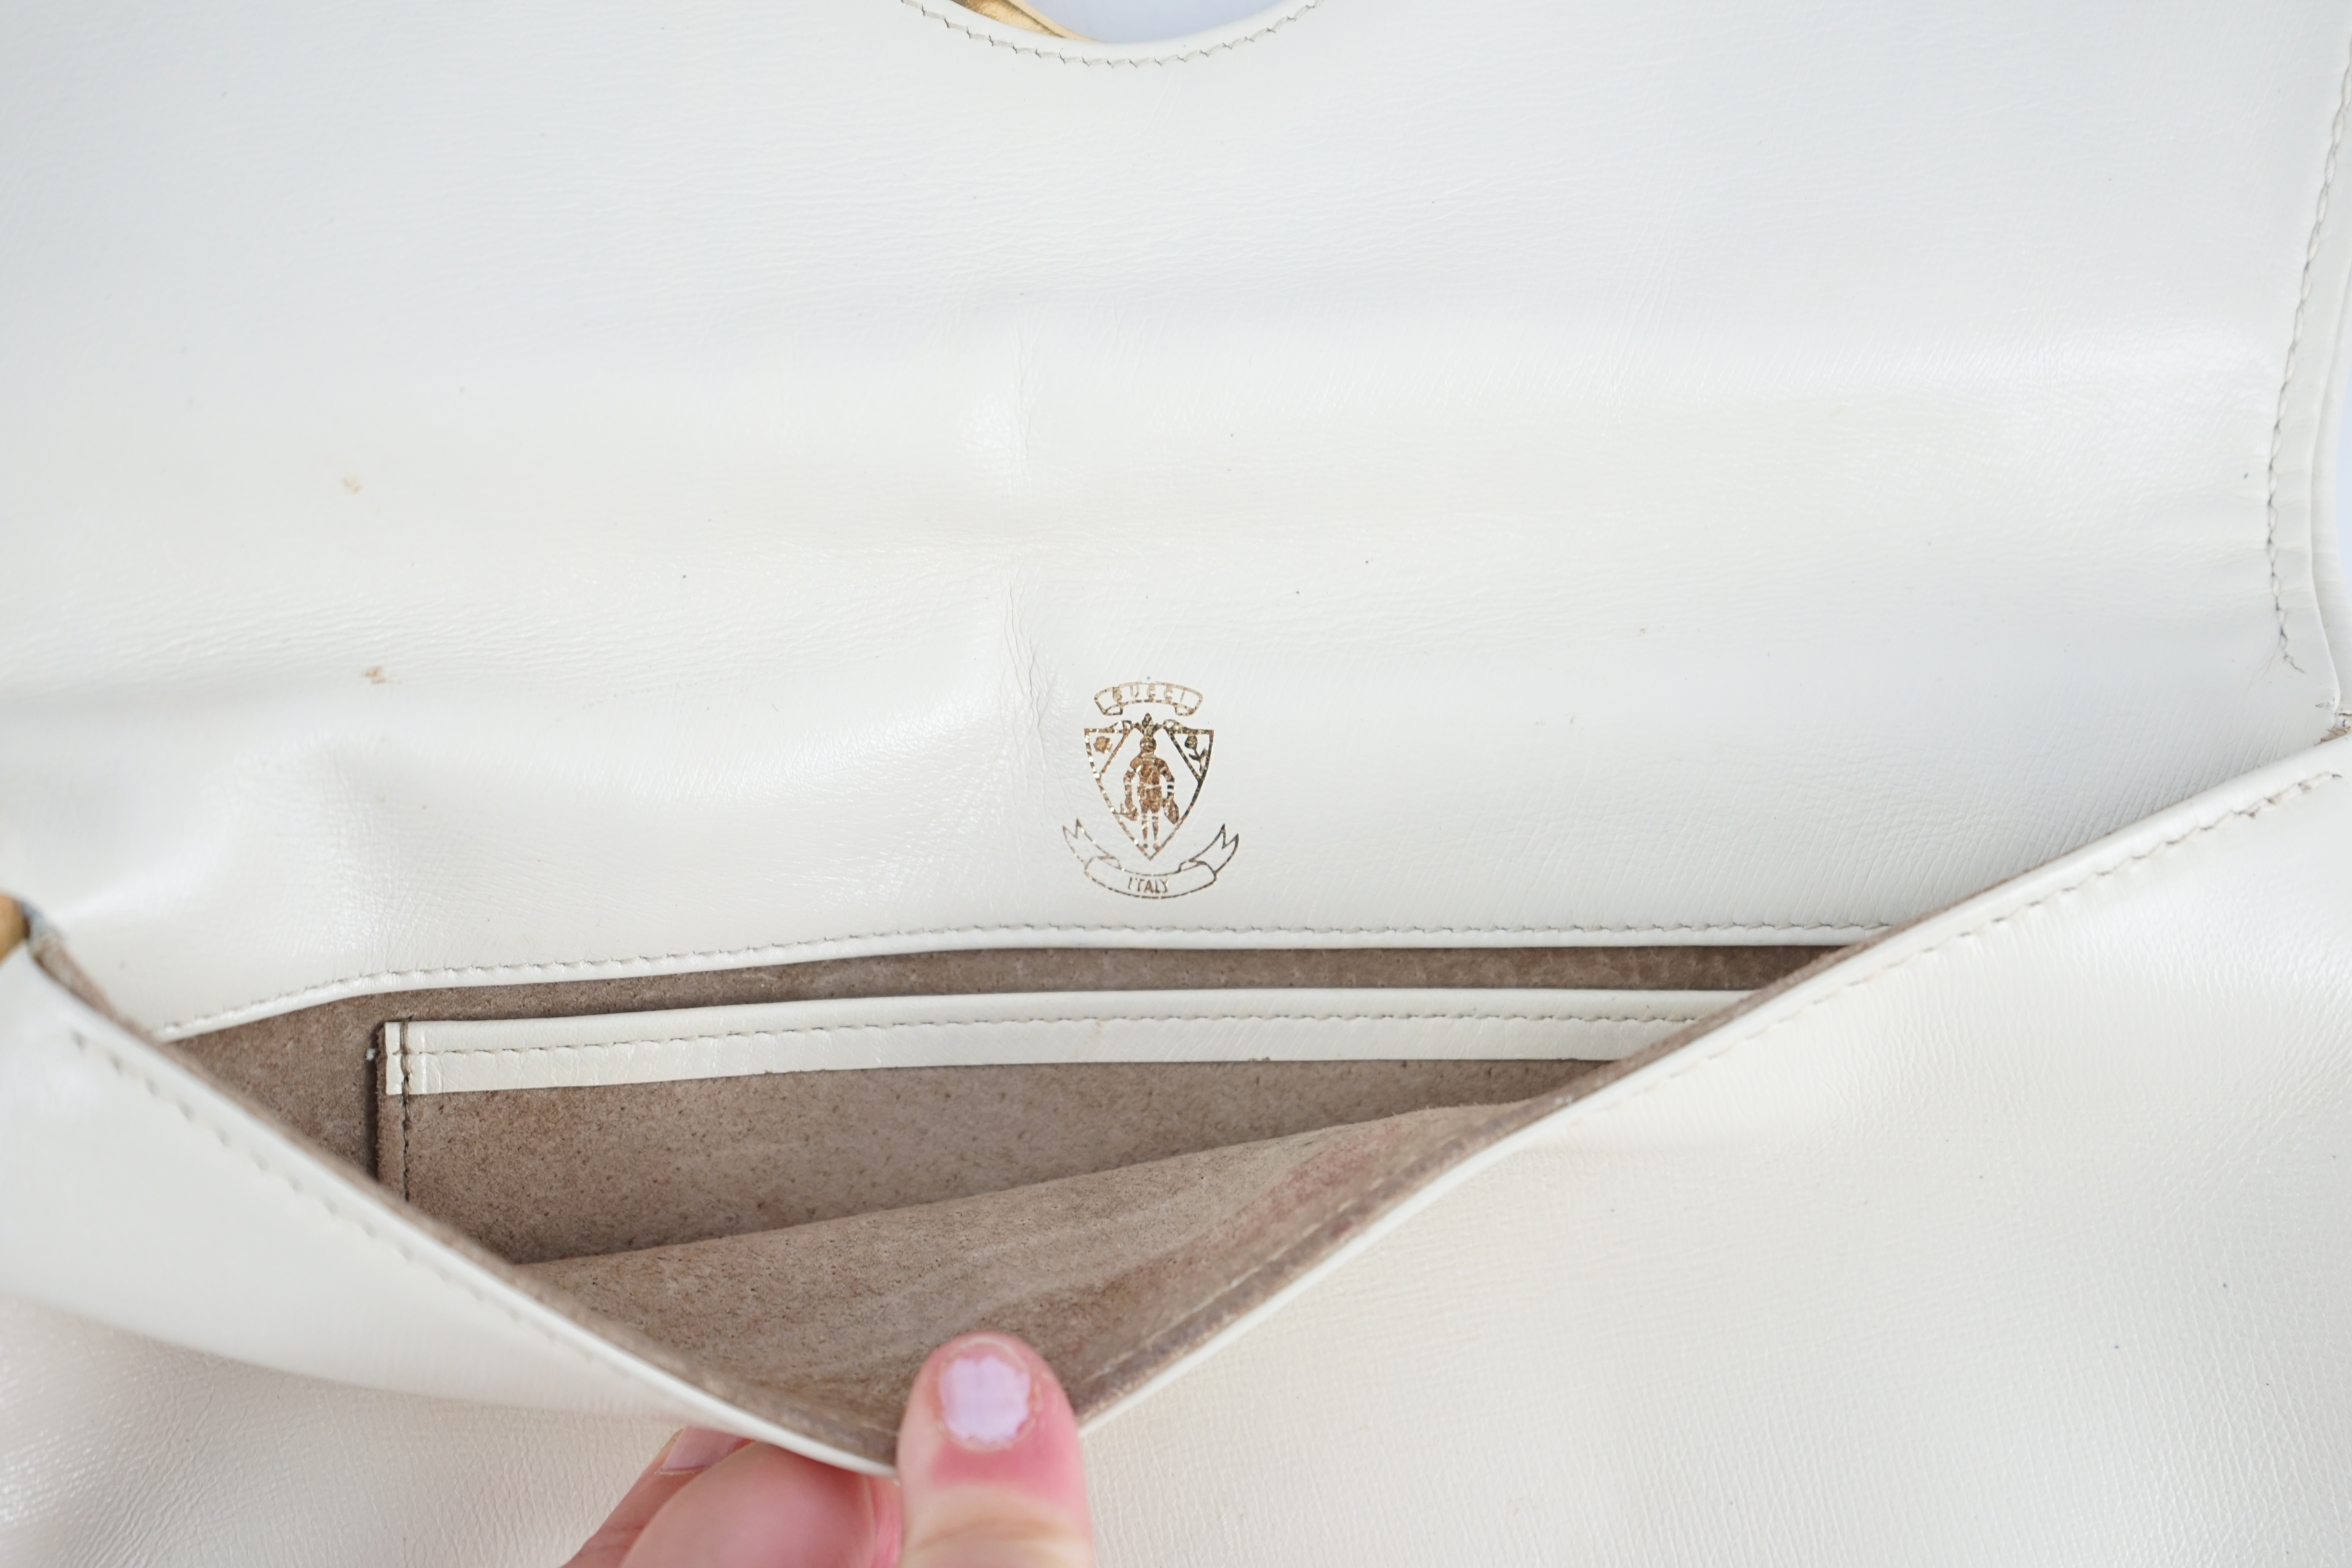 A vintage Gucci Blondie Unicorn ivory cream leather clutch bag, Gold Gucci front logo, weighted - Image 4 of 4